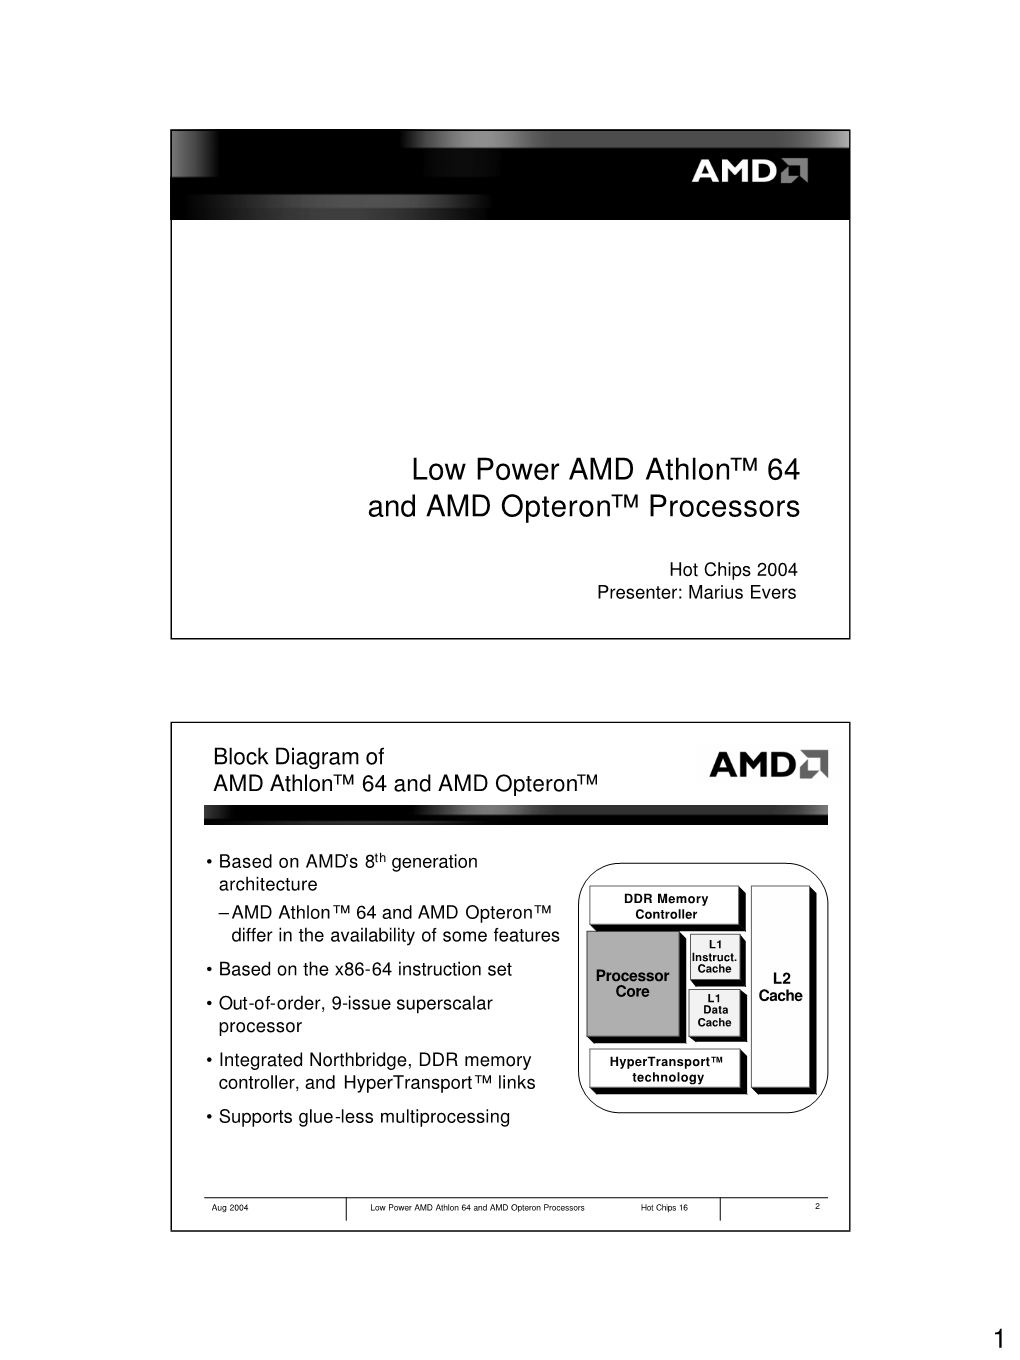 Low Power AMD Athlon™ 64 and AMD Opteron™ Processors